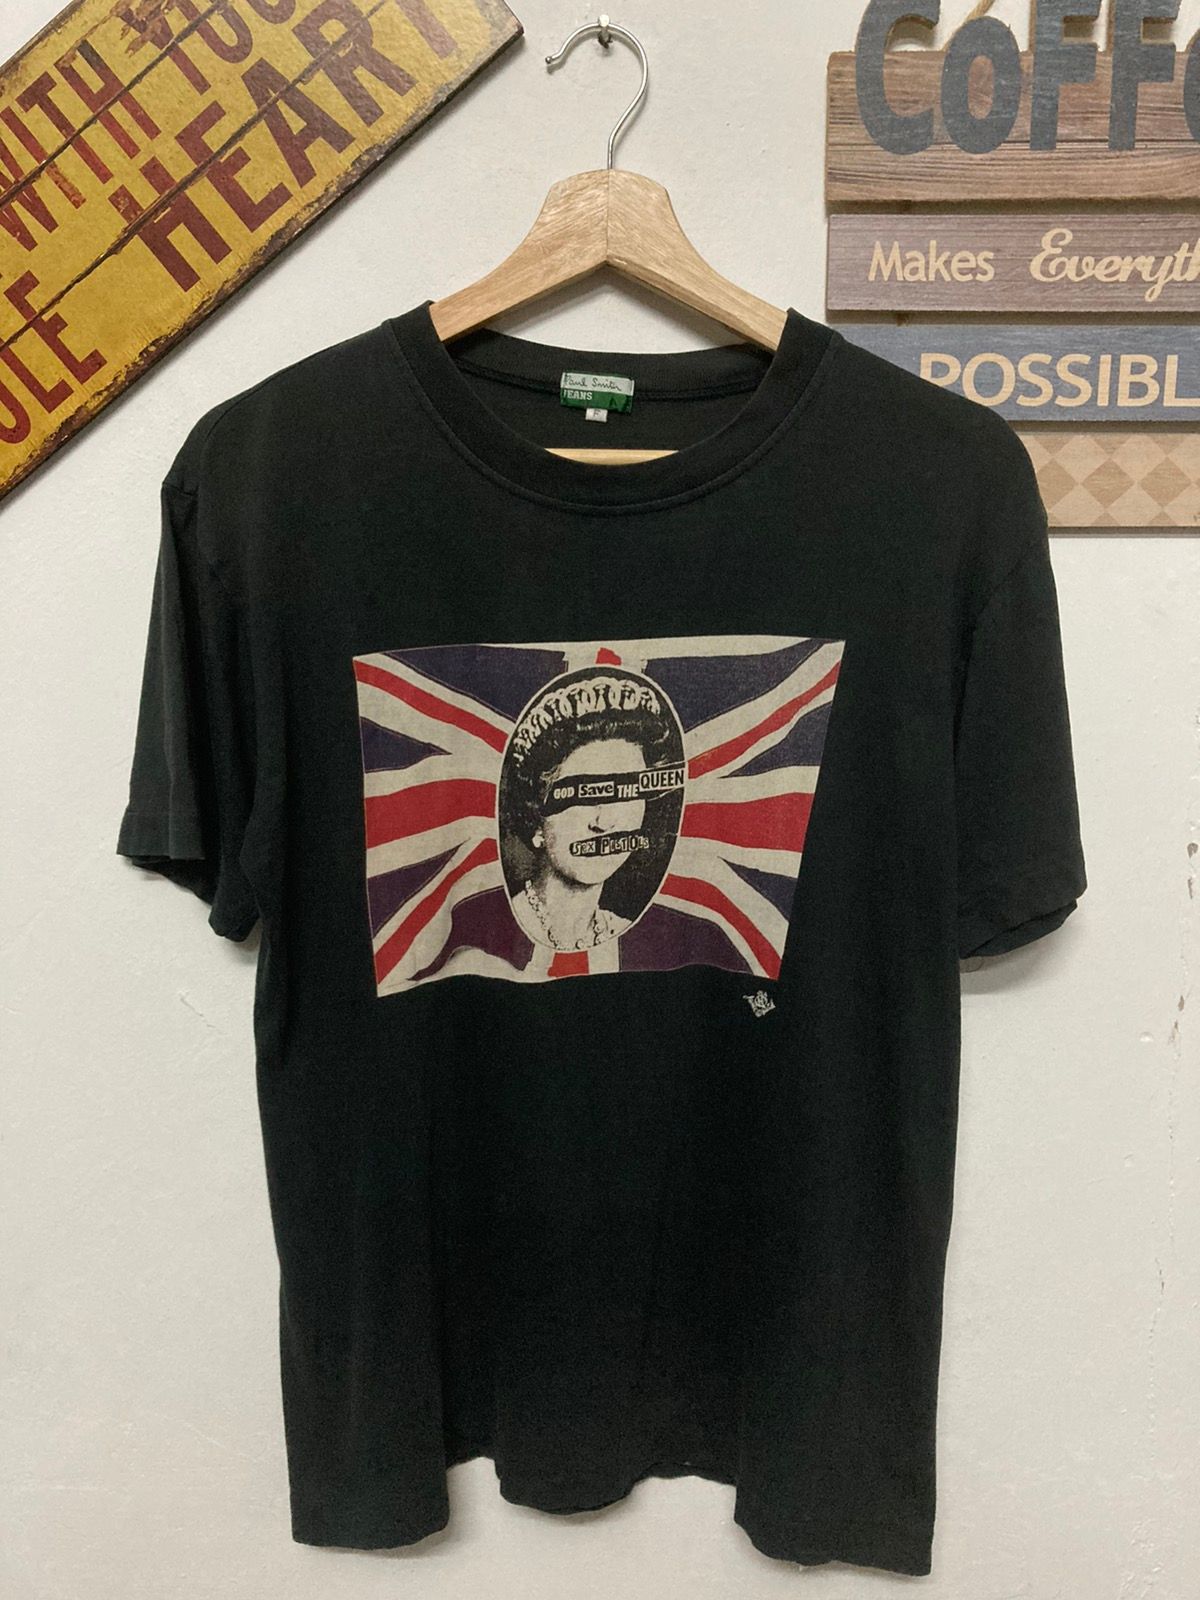 Vintage 90s Paul Smith x Sex Pistols God Save The Queen Tee - 1